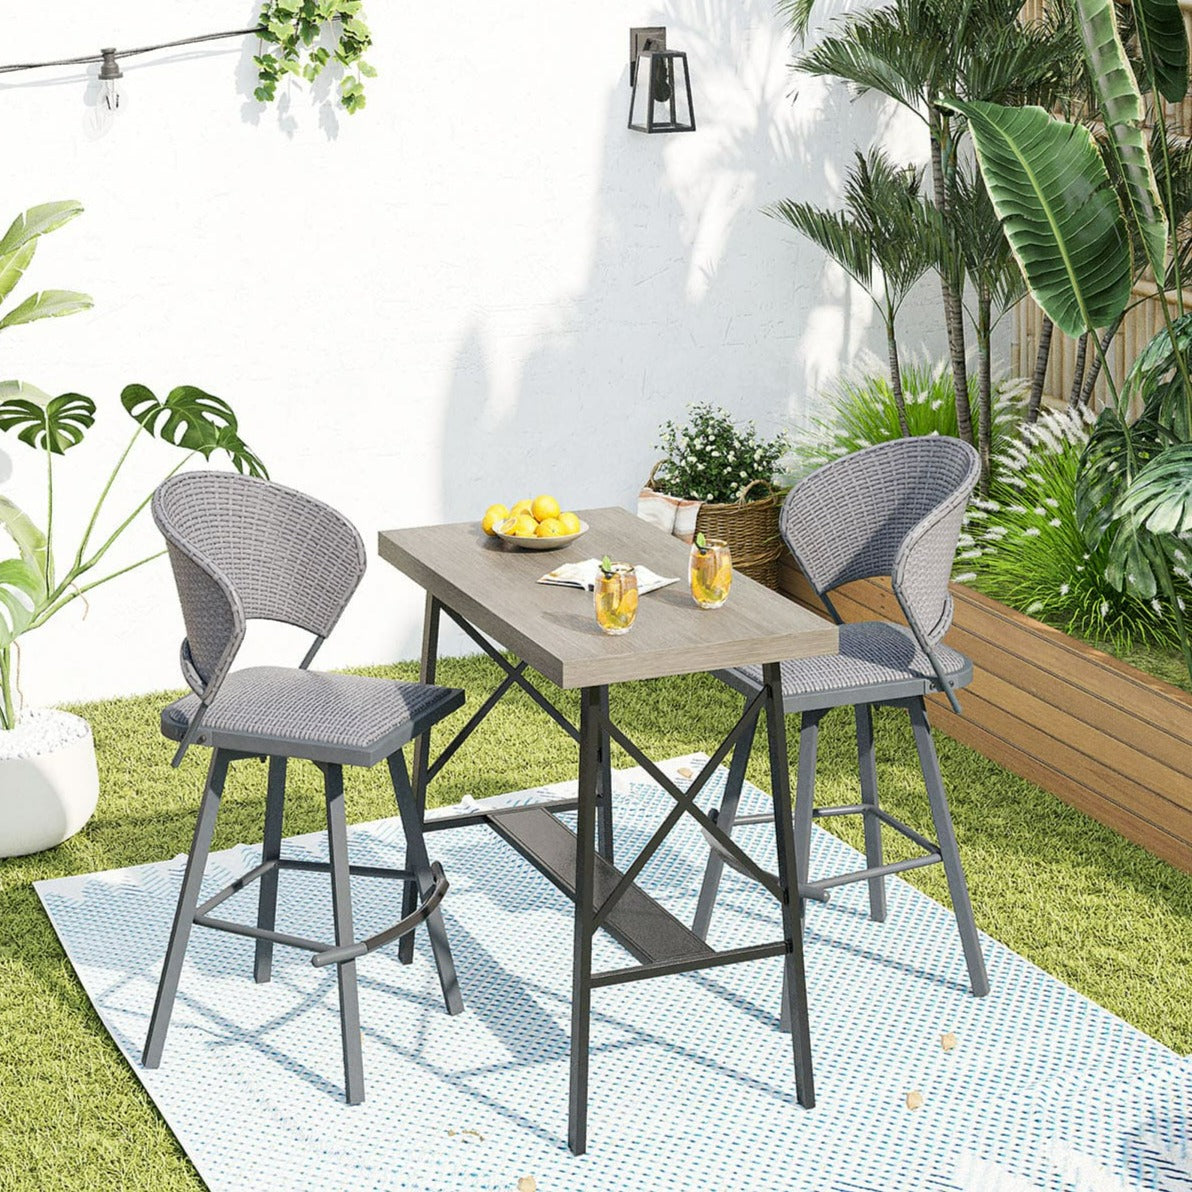 Vicllax 3 PCS Swivel Bar Set, Patio Wicker Bar Chairs and Wider Bar Table